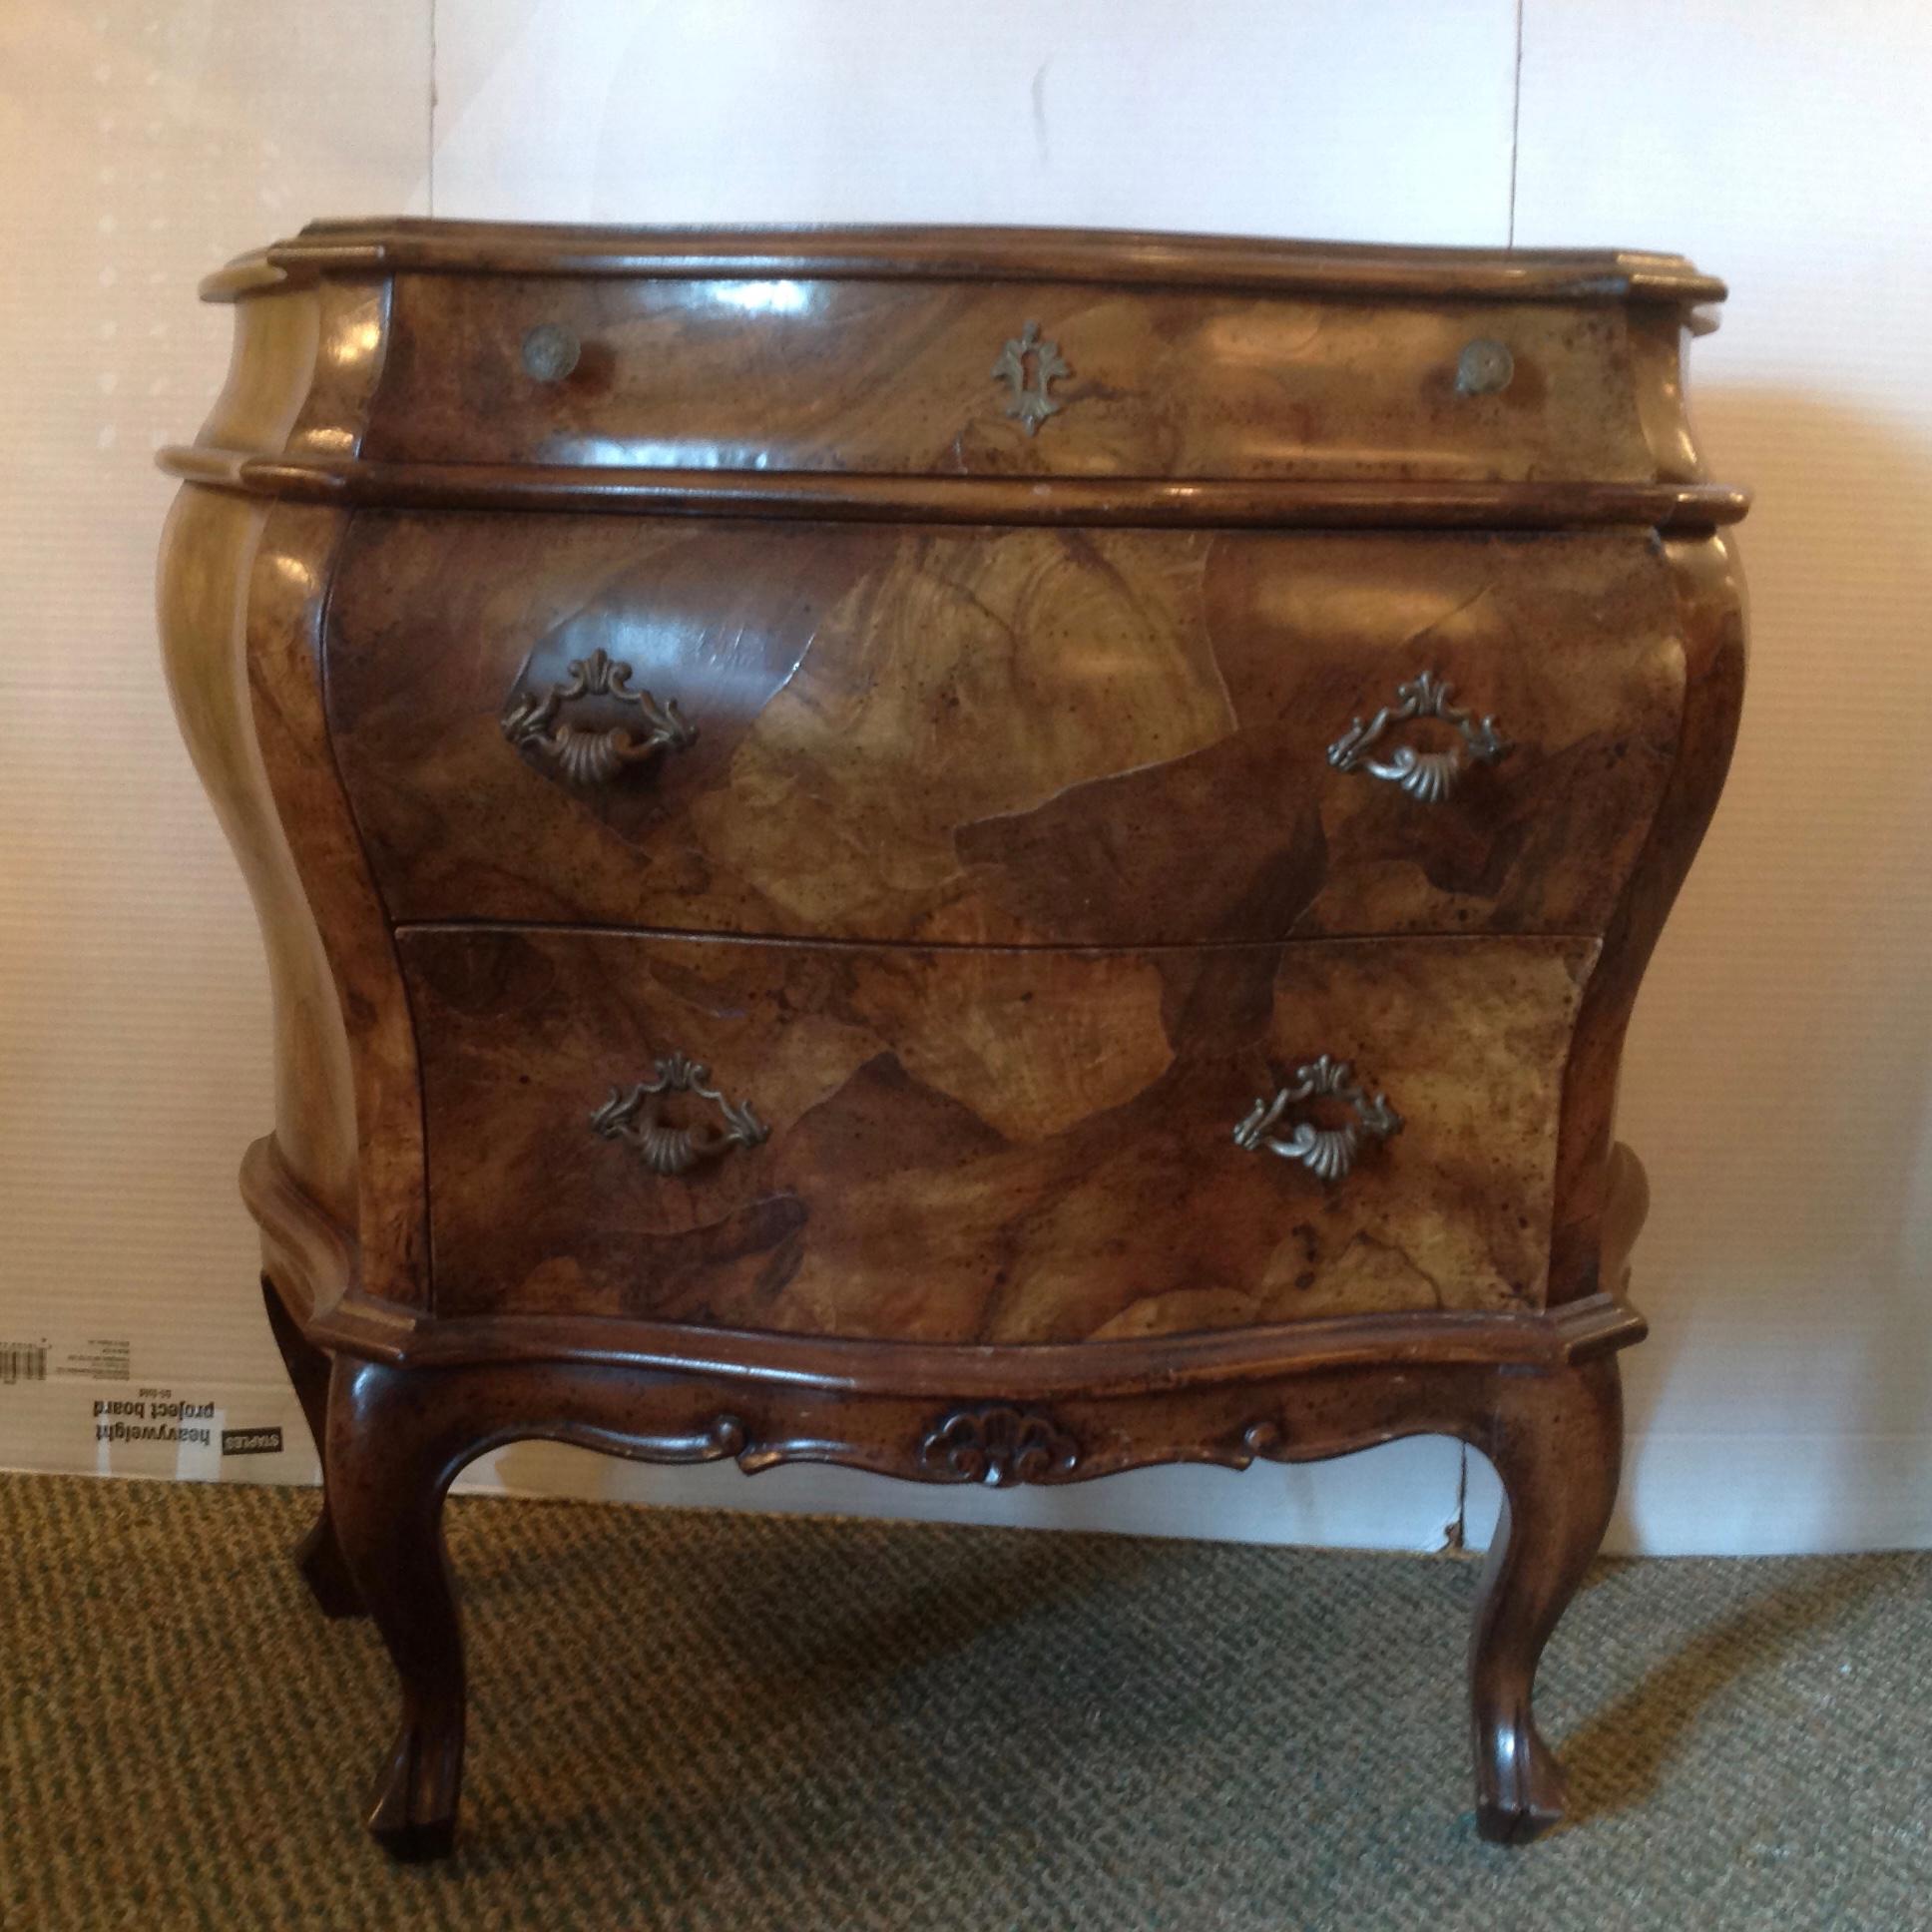 Mellow burl wood veneers, with dramatic bombe form.
An excellent midcentury petite commode.